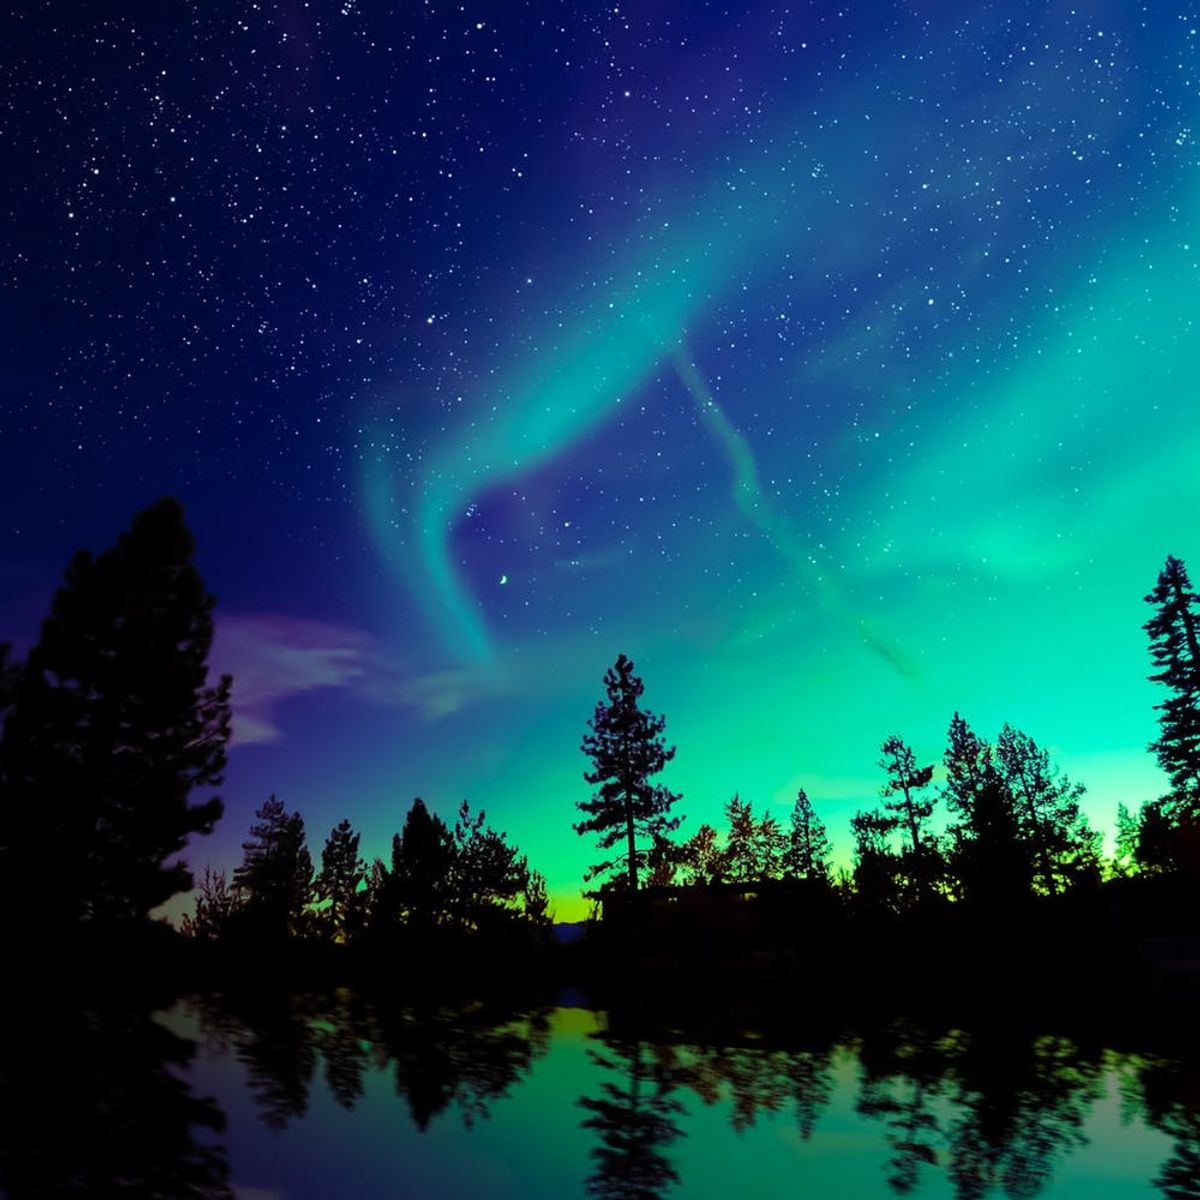 You’ll Be Able to See the Northern Lights from the US Tonight